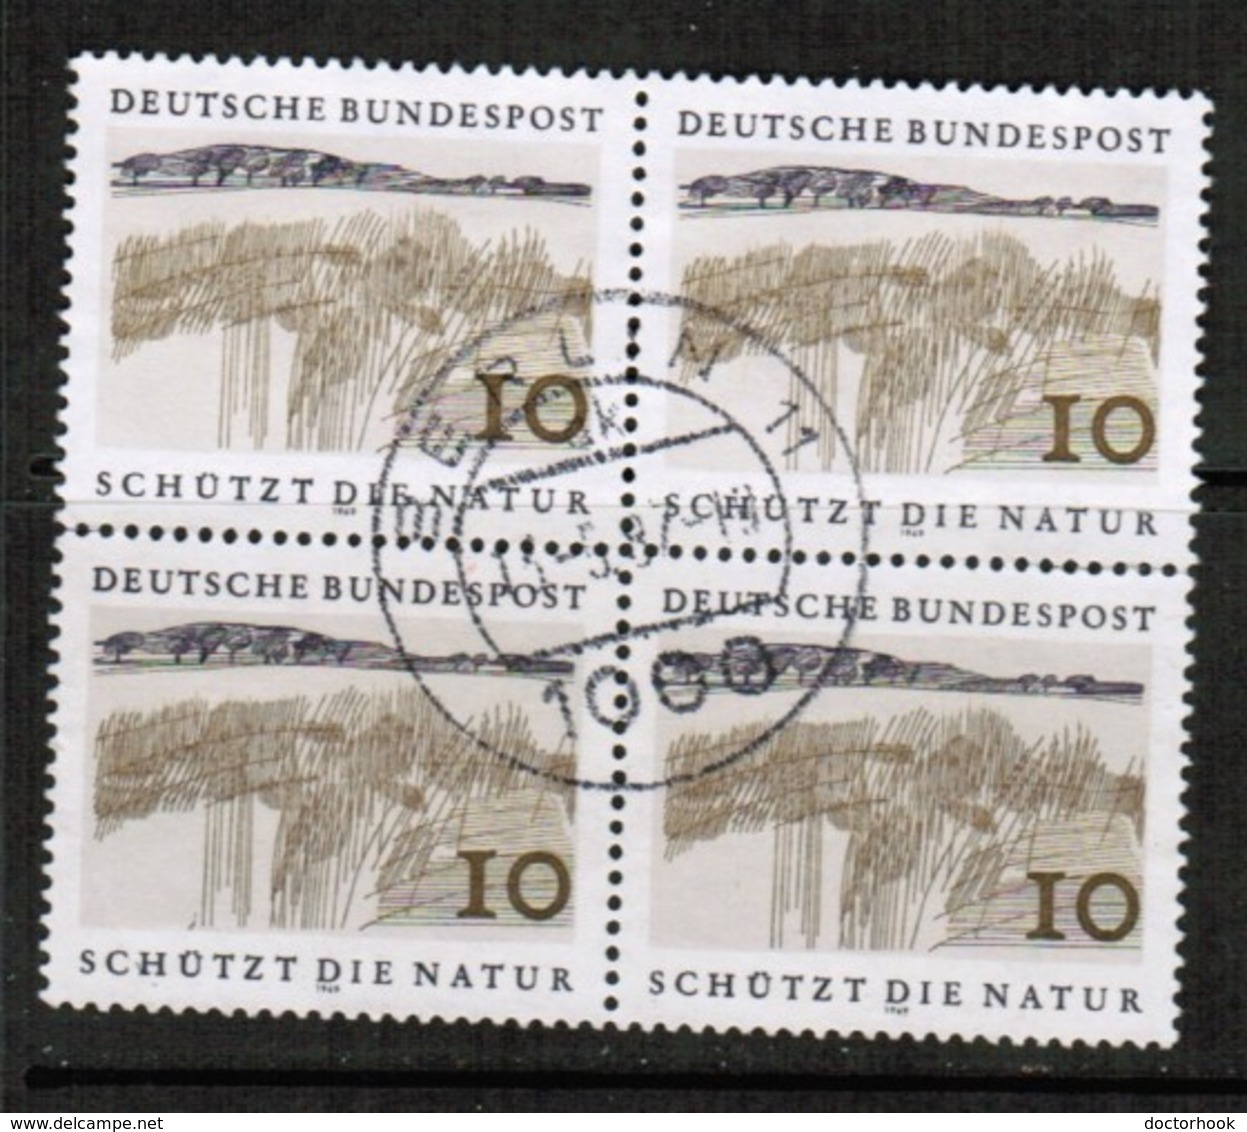 GERMANY  Scott # 1000  VF USED BLOCK Of 4 (Stamp Scan # 474) - Used Stamps